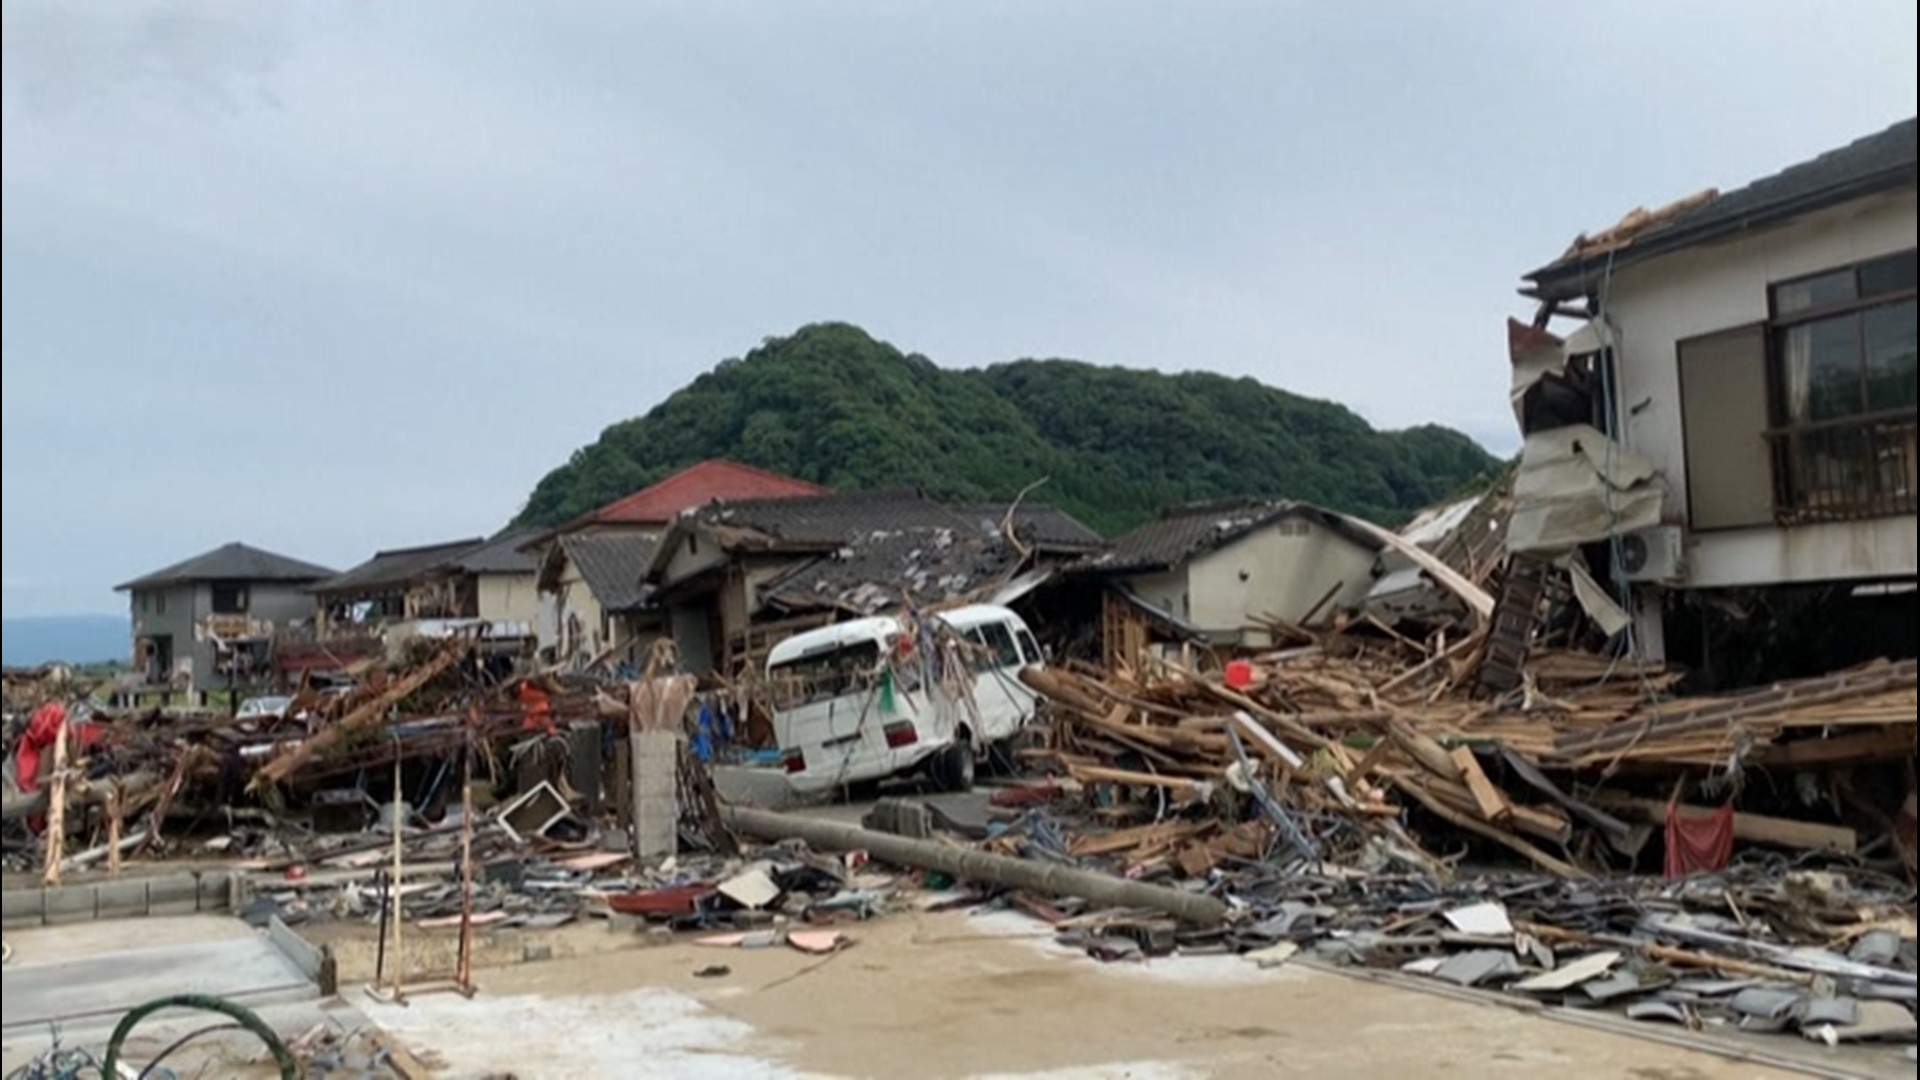 Around 58 people are believed to be dead after floods swept through Kumamura, Japan, in early July, causing extensive damage to the community.